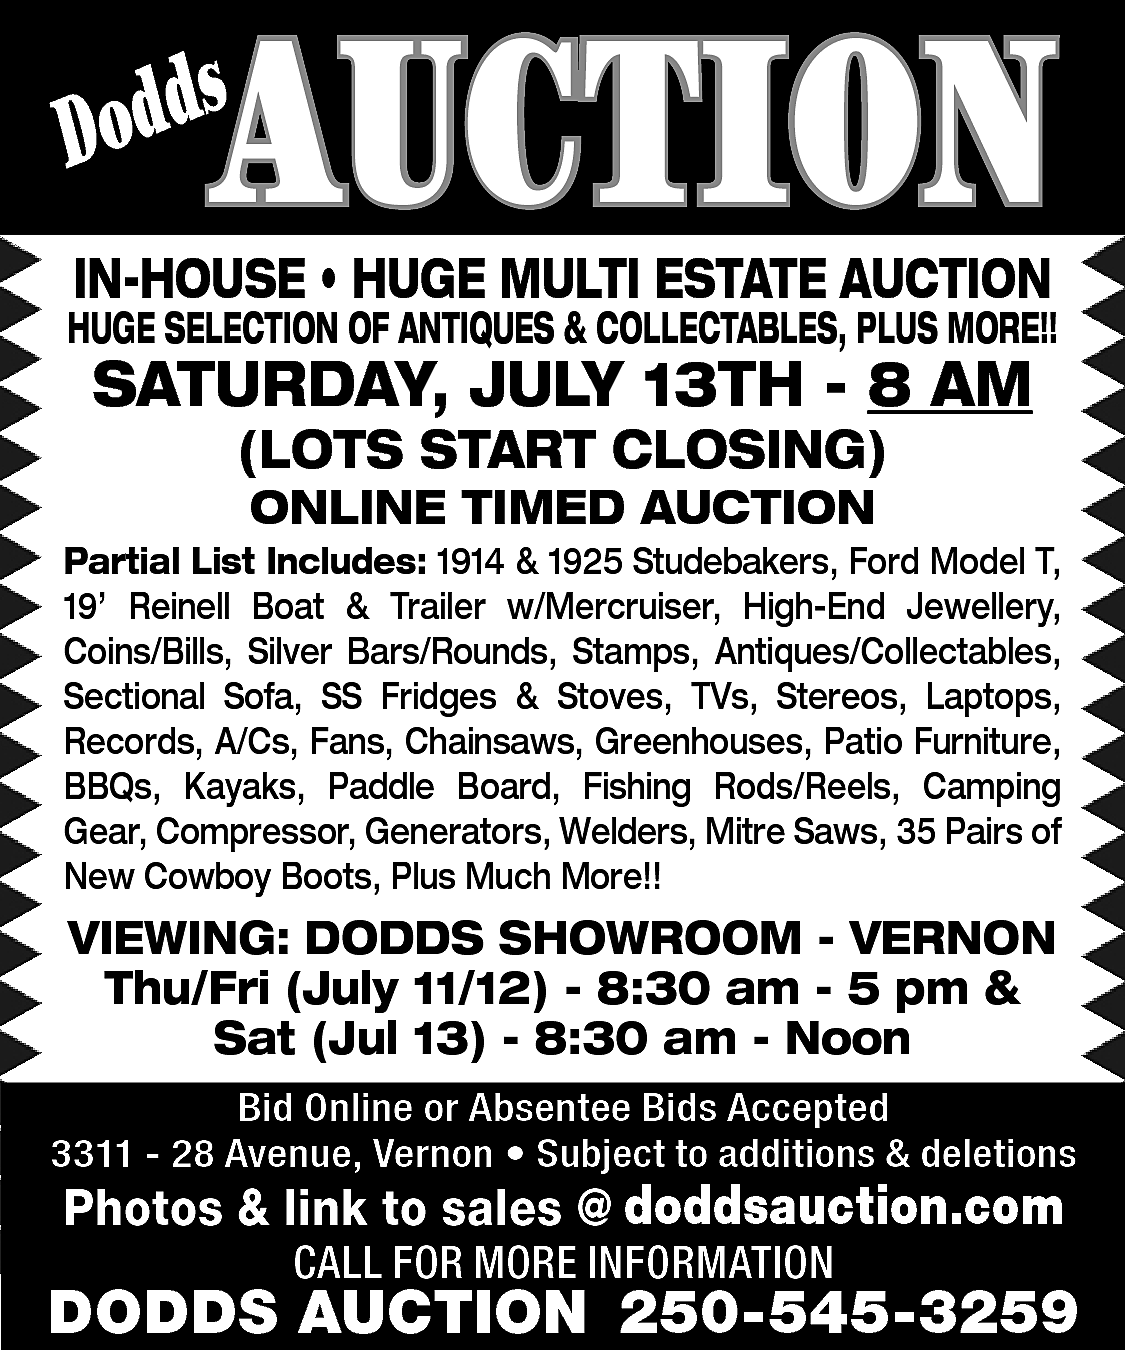 AUCTION <br> <br>s <br>Dodd <br>  AUCTION    s  Dodd    IN-HOUSE • HUGE MULTI ESTATE AUCTION    HUGE SELECTION OF ANTIQUES & COLLECTABLES, PLUS MORE!!    SATURDAY, JULY 13TH - 8 AM  (LOTS START CLOSING)  ONLINE TIMED AUCTION    Partial List Includes: 1914 & 1925 Studebakers, Ford Model T,  19’ Reinell Boat & Trailer w/Mercruiser, High-End Jewellery,  Coins/Bills, Silver Bars/Rounds, Stamps, Antiques/Collectables,  Sectional Sofa, SS Fridges & Stoves, TVs, Stereos, Laptops,  Records, A/Cs, Fans, Chainsaws, Greenhouses, Patio Furniture,  BBQs, Kayaks, Paddle Board, Fishing Rods/Reels, Camping  Gear, Compressor, Generators, Welders, Mitre Saws, 35 Pairs of  New Cowboy Boots, Plus Much More!!    VIEWING: DODDS SHOWROOM - VERNON  Thu/Fri (July 11/12) - 8:30 am - 5 pm &  Sat (Jul 13) - 8:30 am - Noon  Bid Online or Absentee Bids Accepted  3311 - 28 Avenue, Vernon • Subject to additions & deletions    www.doddsauction.com  Photos & link to sales @  doddsauction.com  CALL FOR MORE INFORMATION    DODDS AUCTION 250-545-3259    